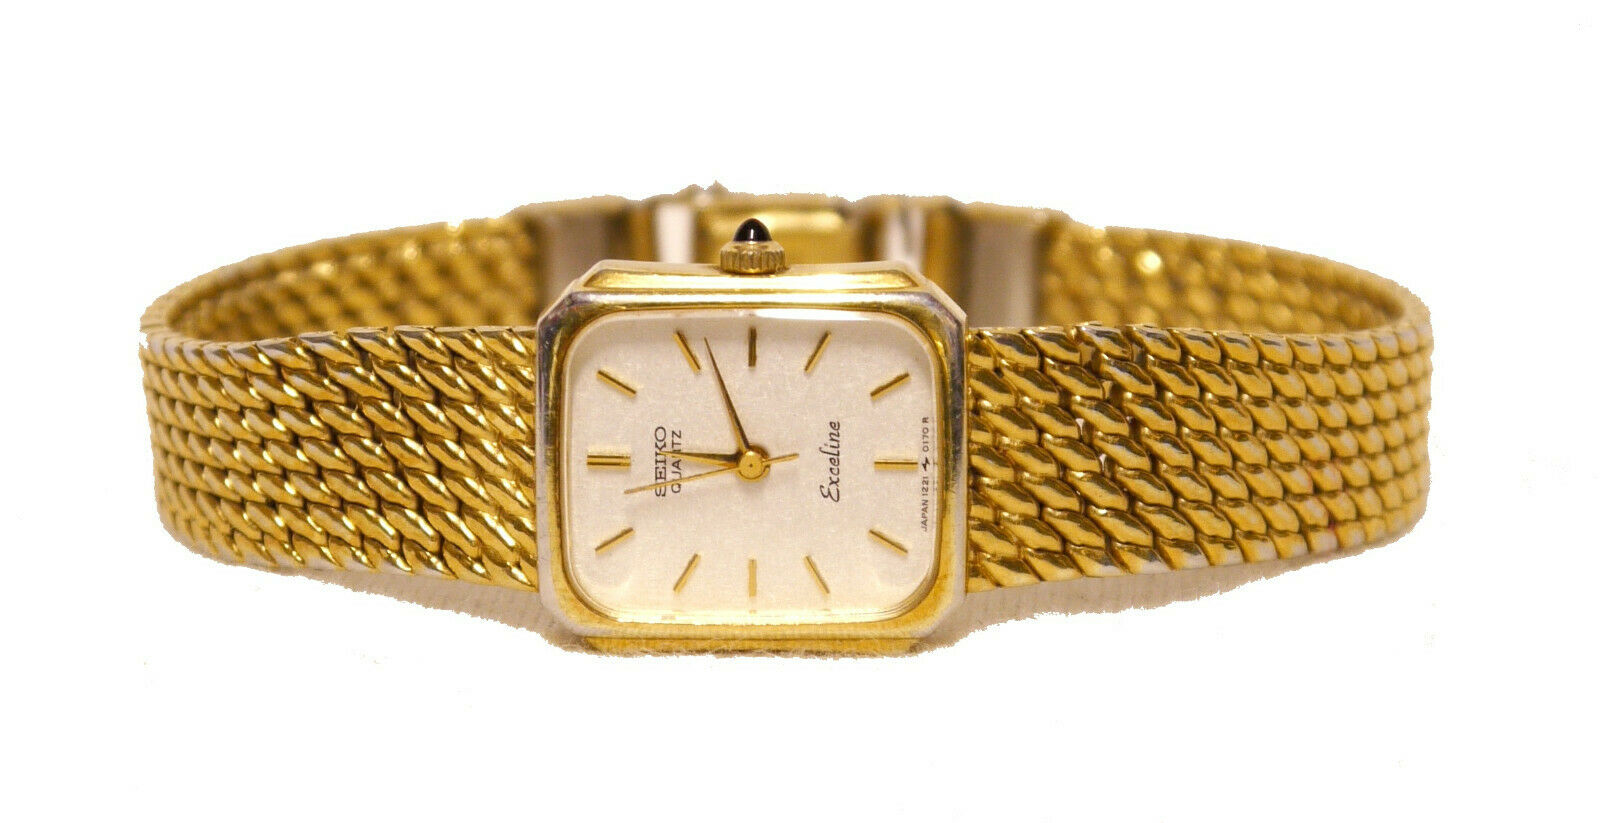 Seiko Exceline Ladies Gold Plated Watch : 1221-5090 Movement - VGC